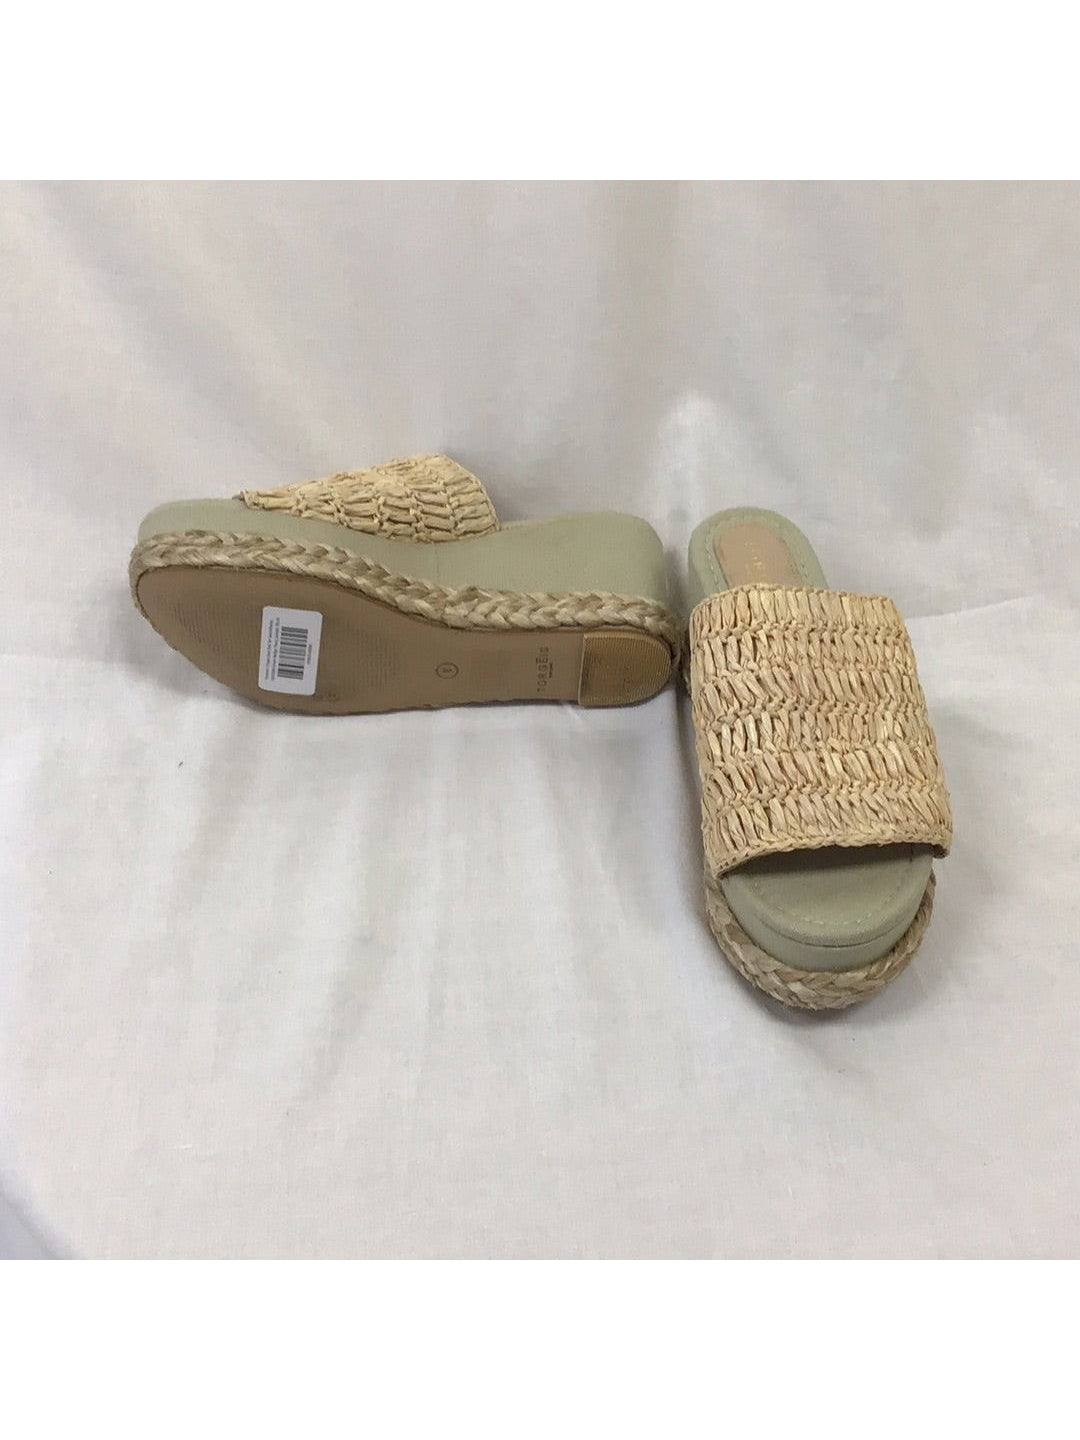 Women's Torgeis New York Tan Island Braided Woven Wedge Thong Sandals 8 - The Kennedy Collective Thrift - 